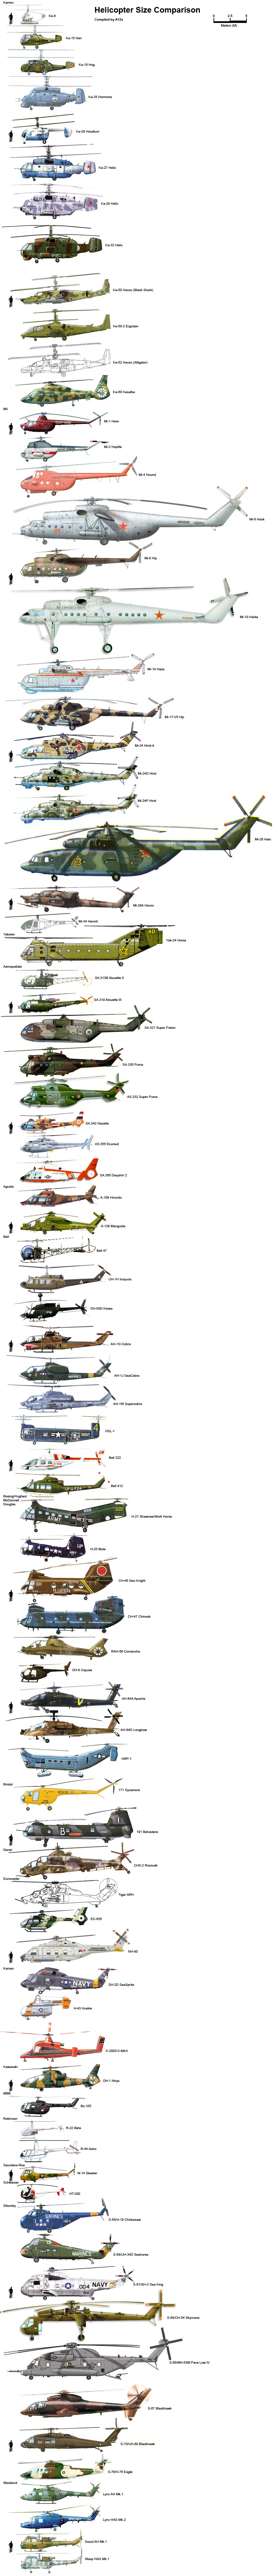 comparaison-taille-helicoptere